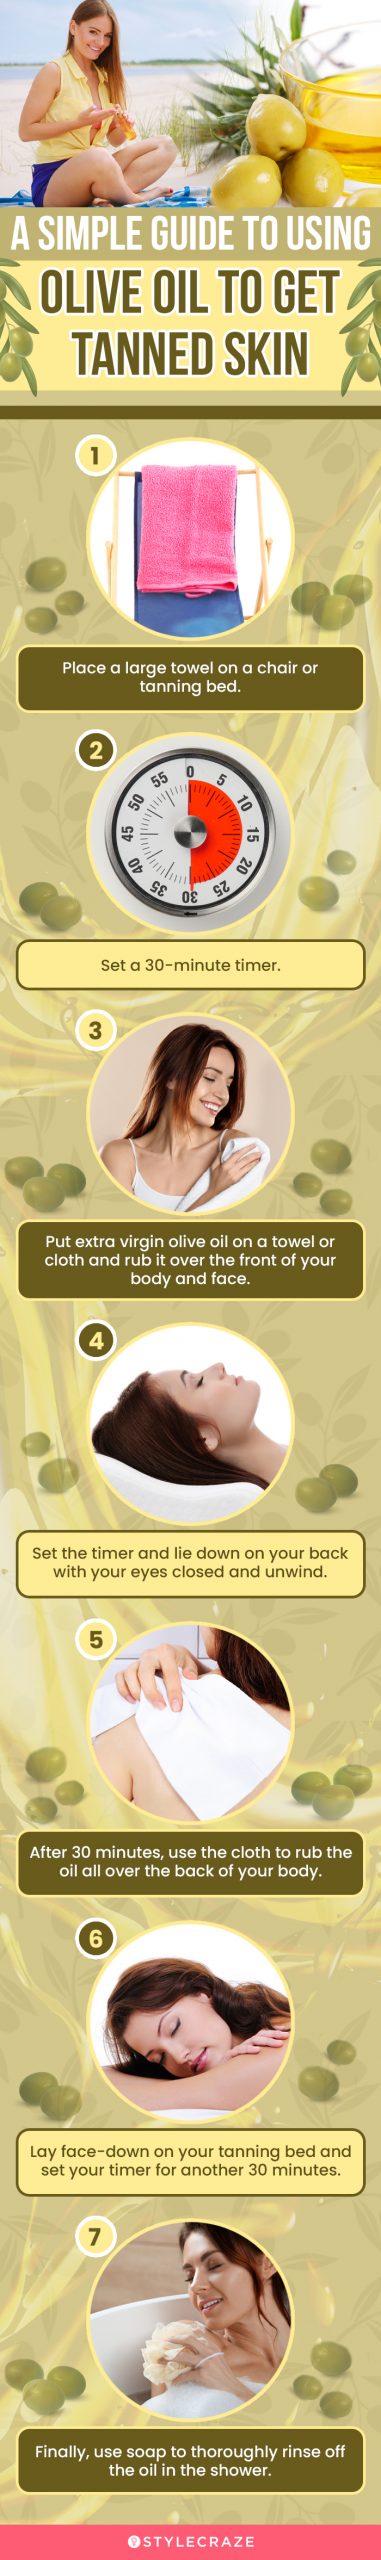 a simple guide to using olive oil to get tanned skin (infographic)